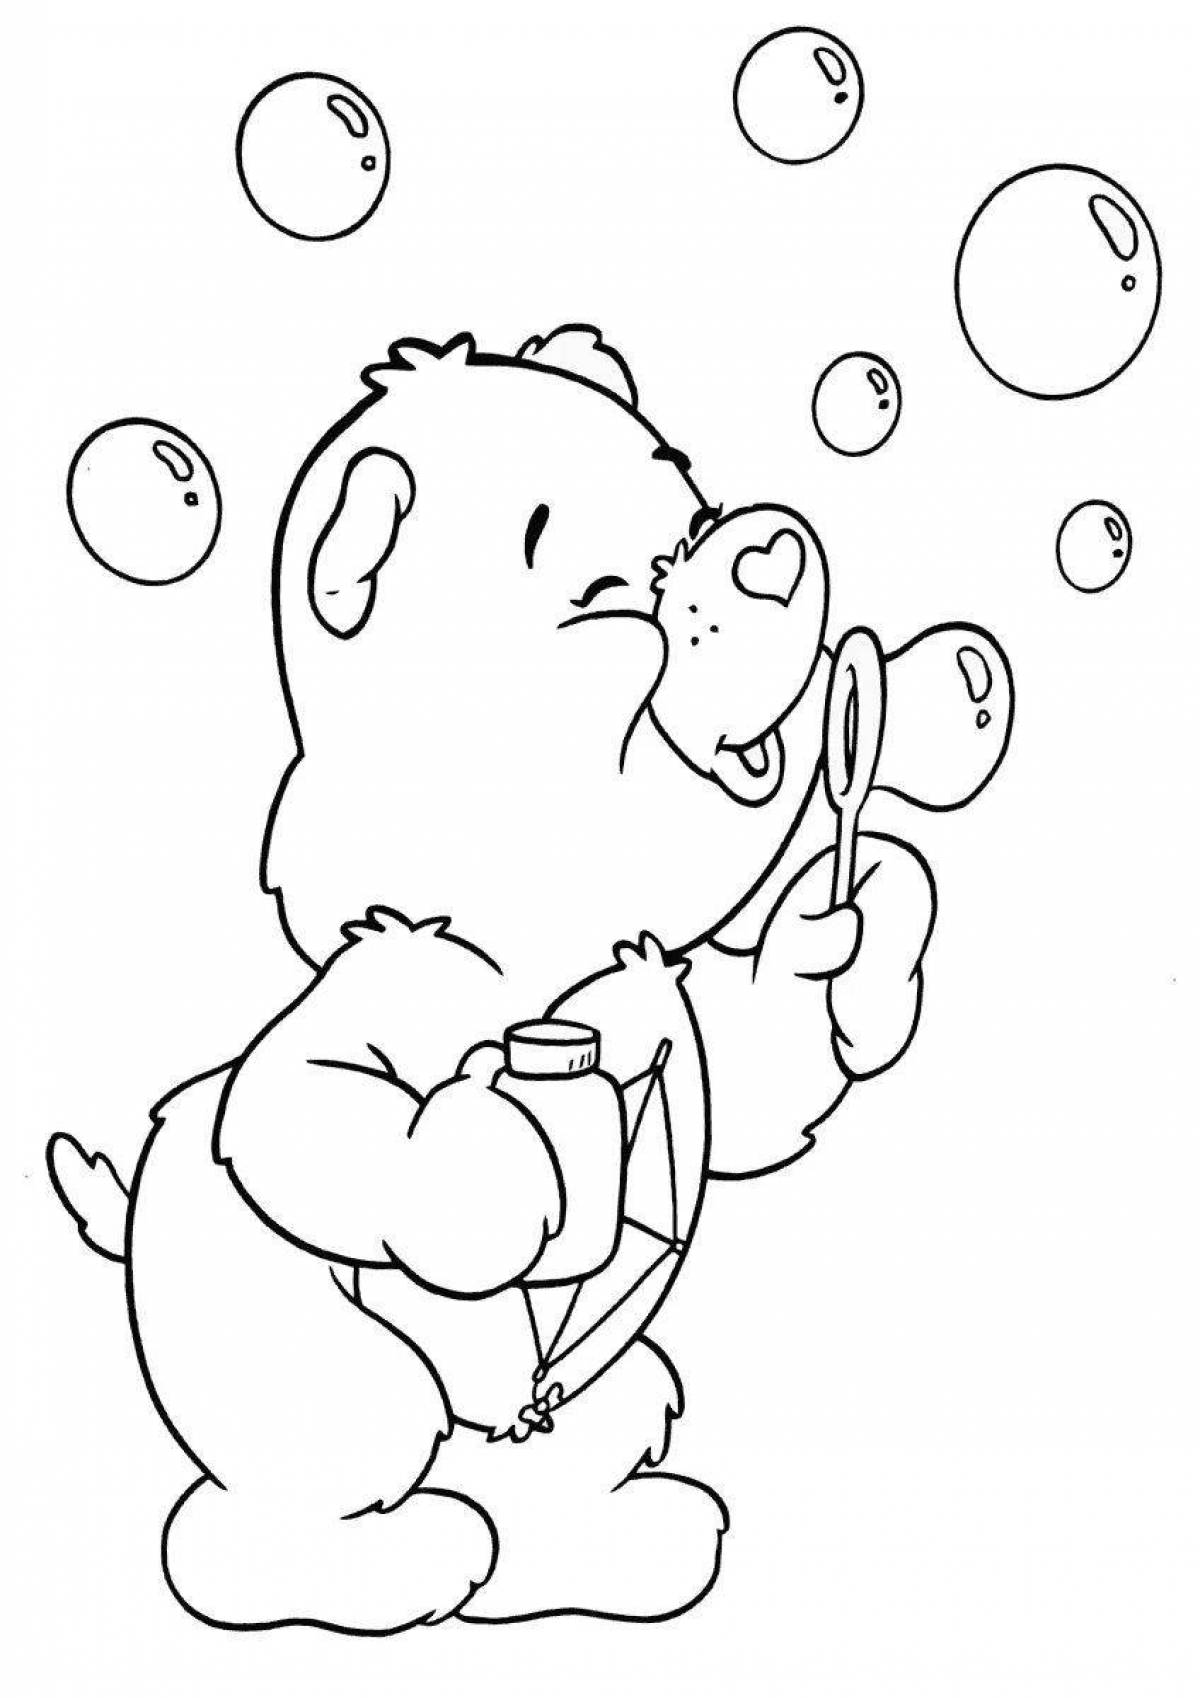 Coloring page of shining bubbles